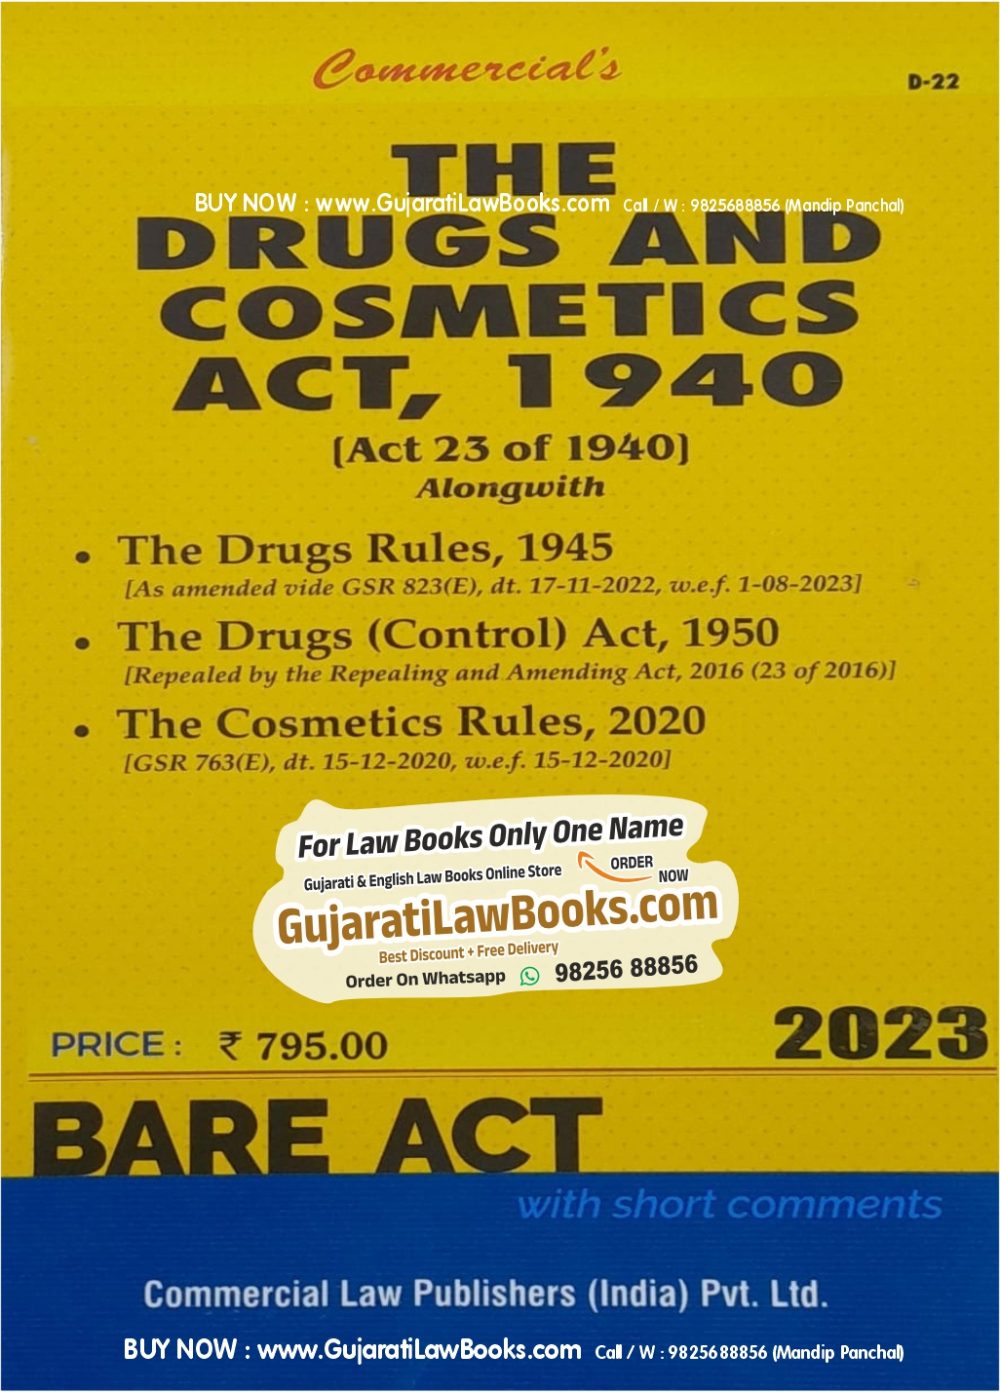 The Drugs and Cosmetics Act, 1940 - BARE ACT - Latest October 2023 Edition Commercial